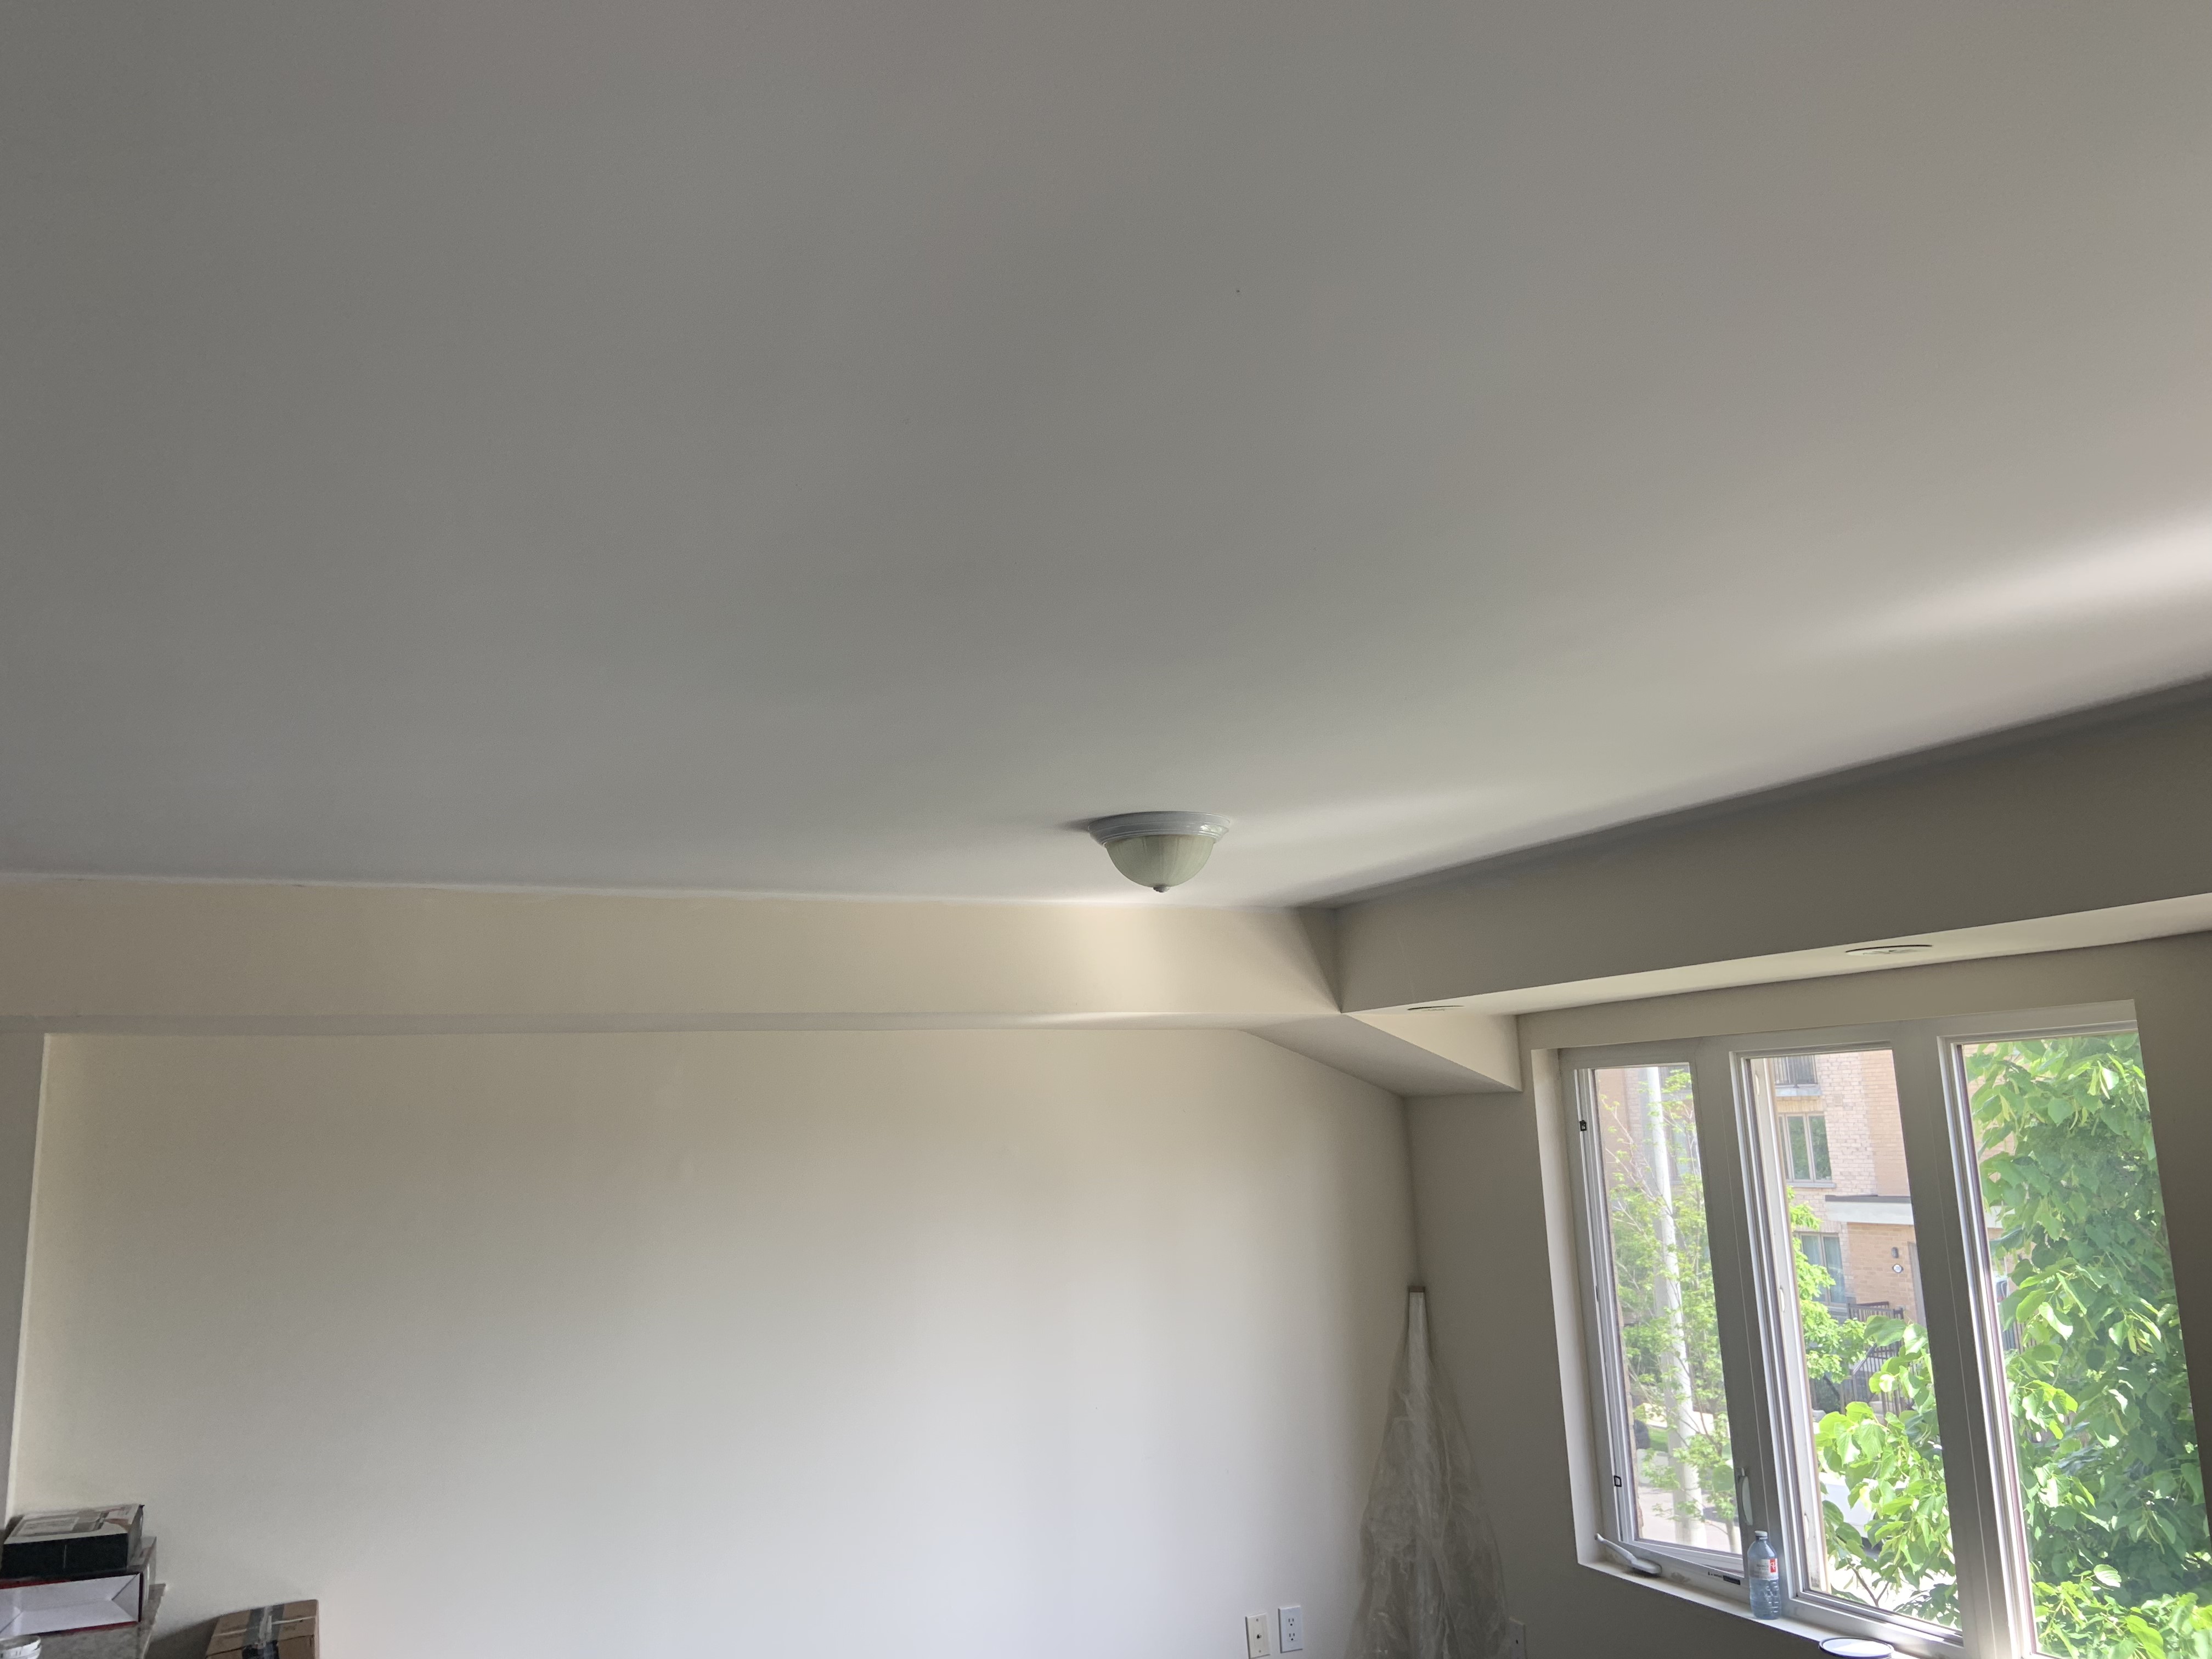 Popcorn Ceiling Removal after